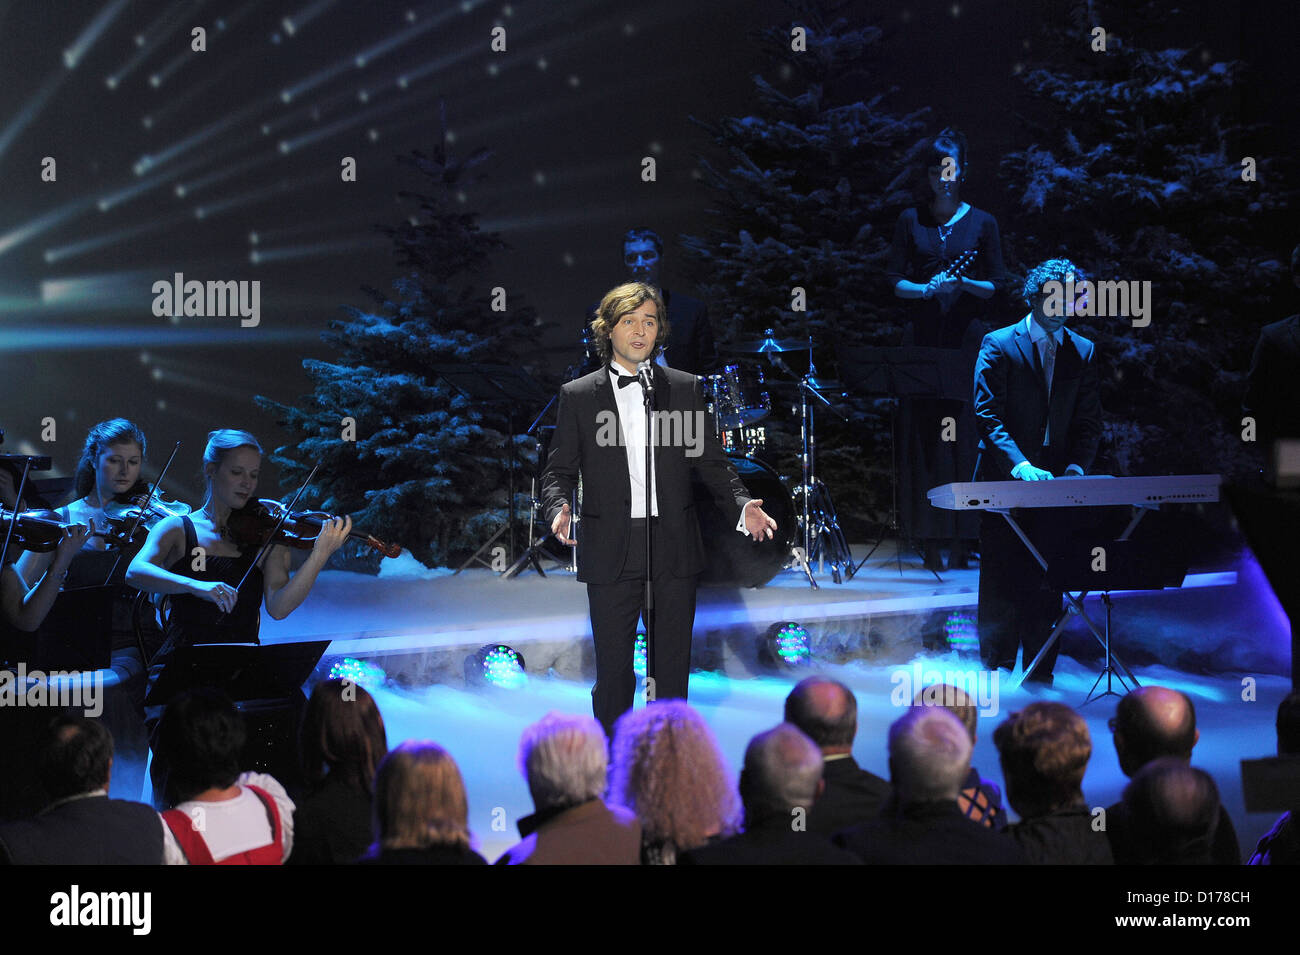 Swiss tenor Erkan Aki performs at the ZDF telethon 'Wonderful Christmas Songs' ('Die schoensten Weihnachts-Hits') to help the cause of relief agencies 'Misereor' and 'Brot fuer die Welt' in Munich, Germany, 06 December 2012. Both agencies support aid in Africa, Asia and Latin America. Photo: Ursula Dueren Stock Photo